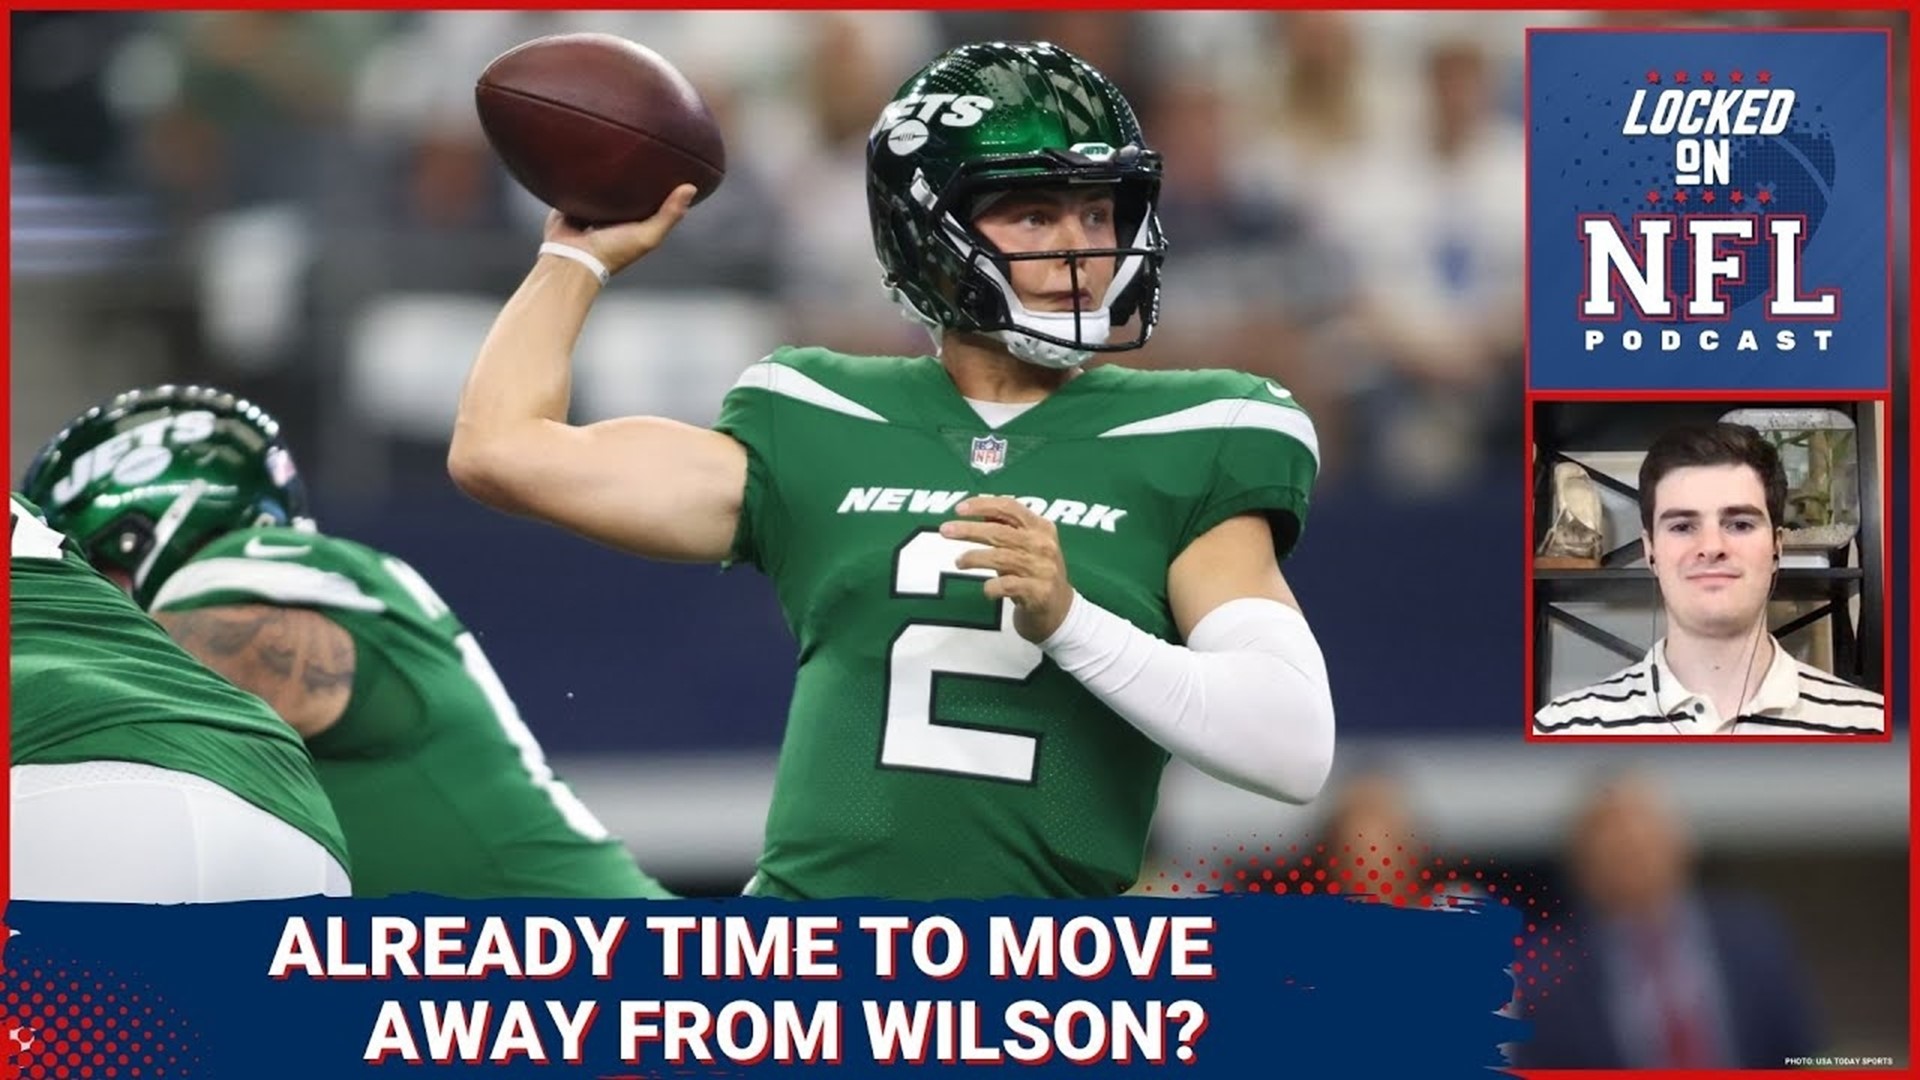 We look at if the New York Jets need to find a better quarterback option than Zach Wilson in the wake of Aaron Rodgers' injury